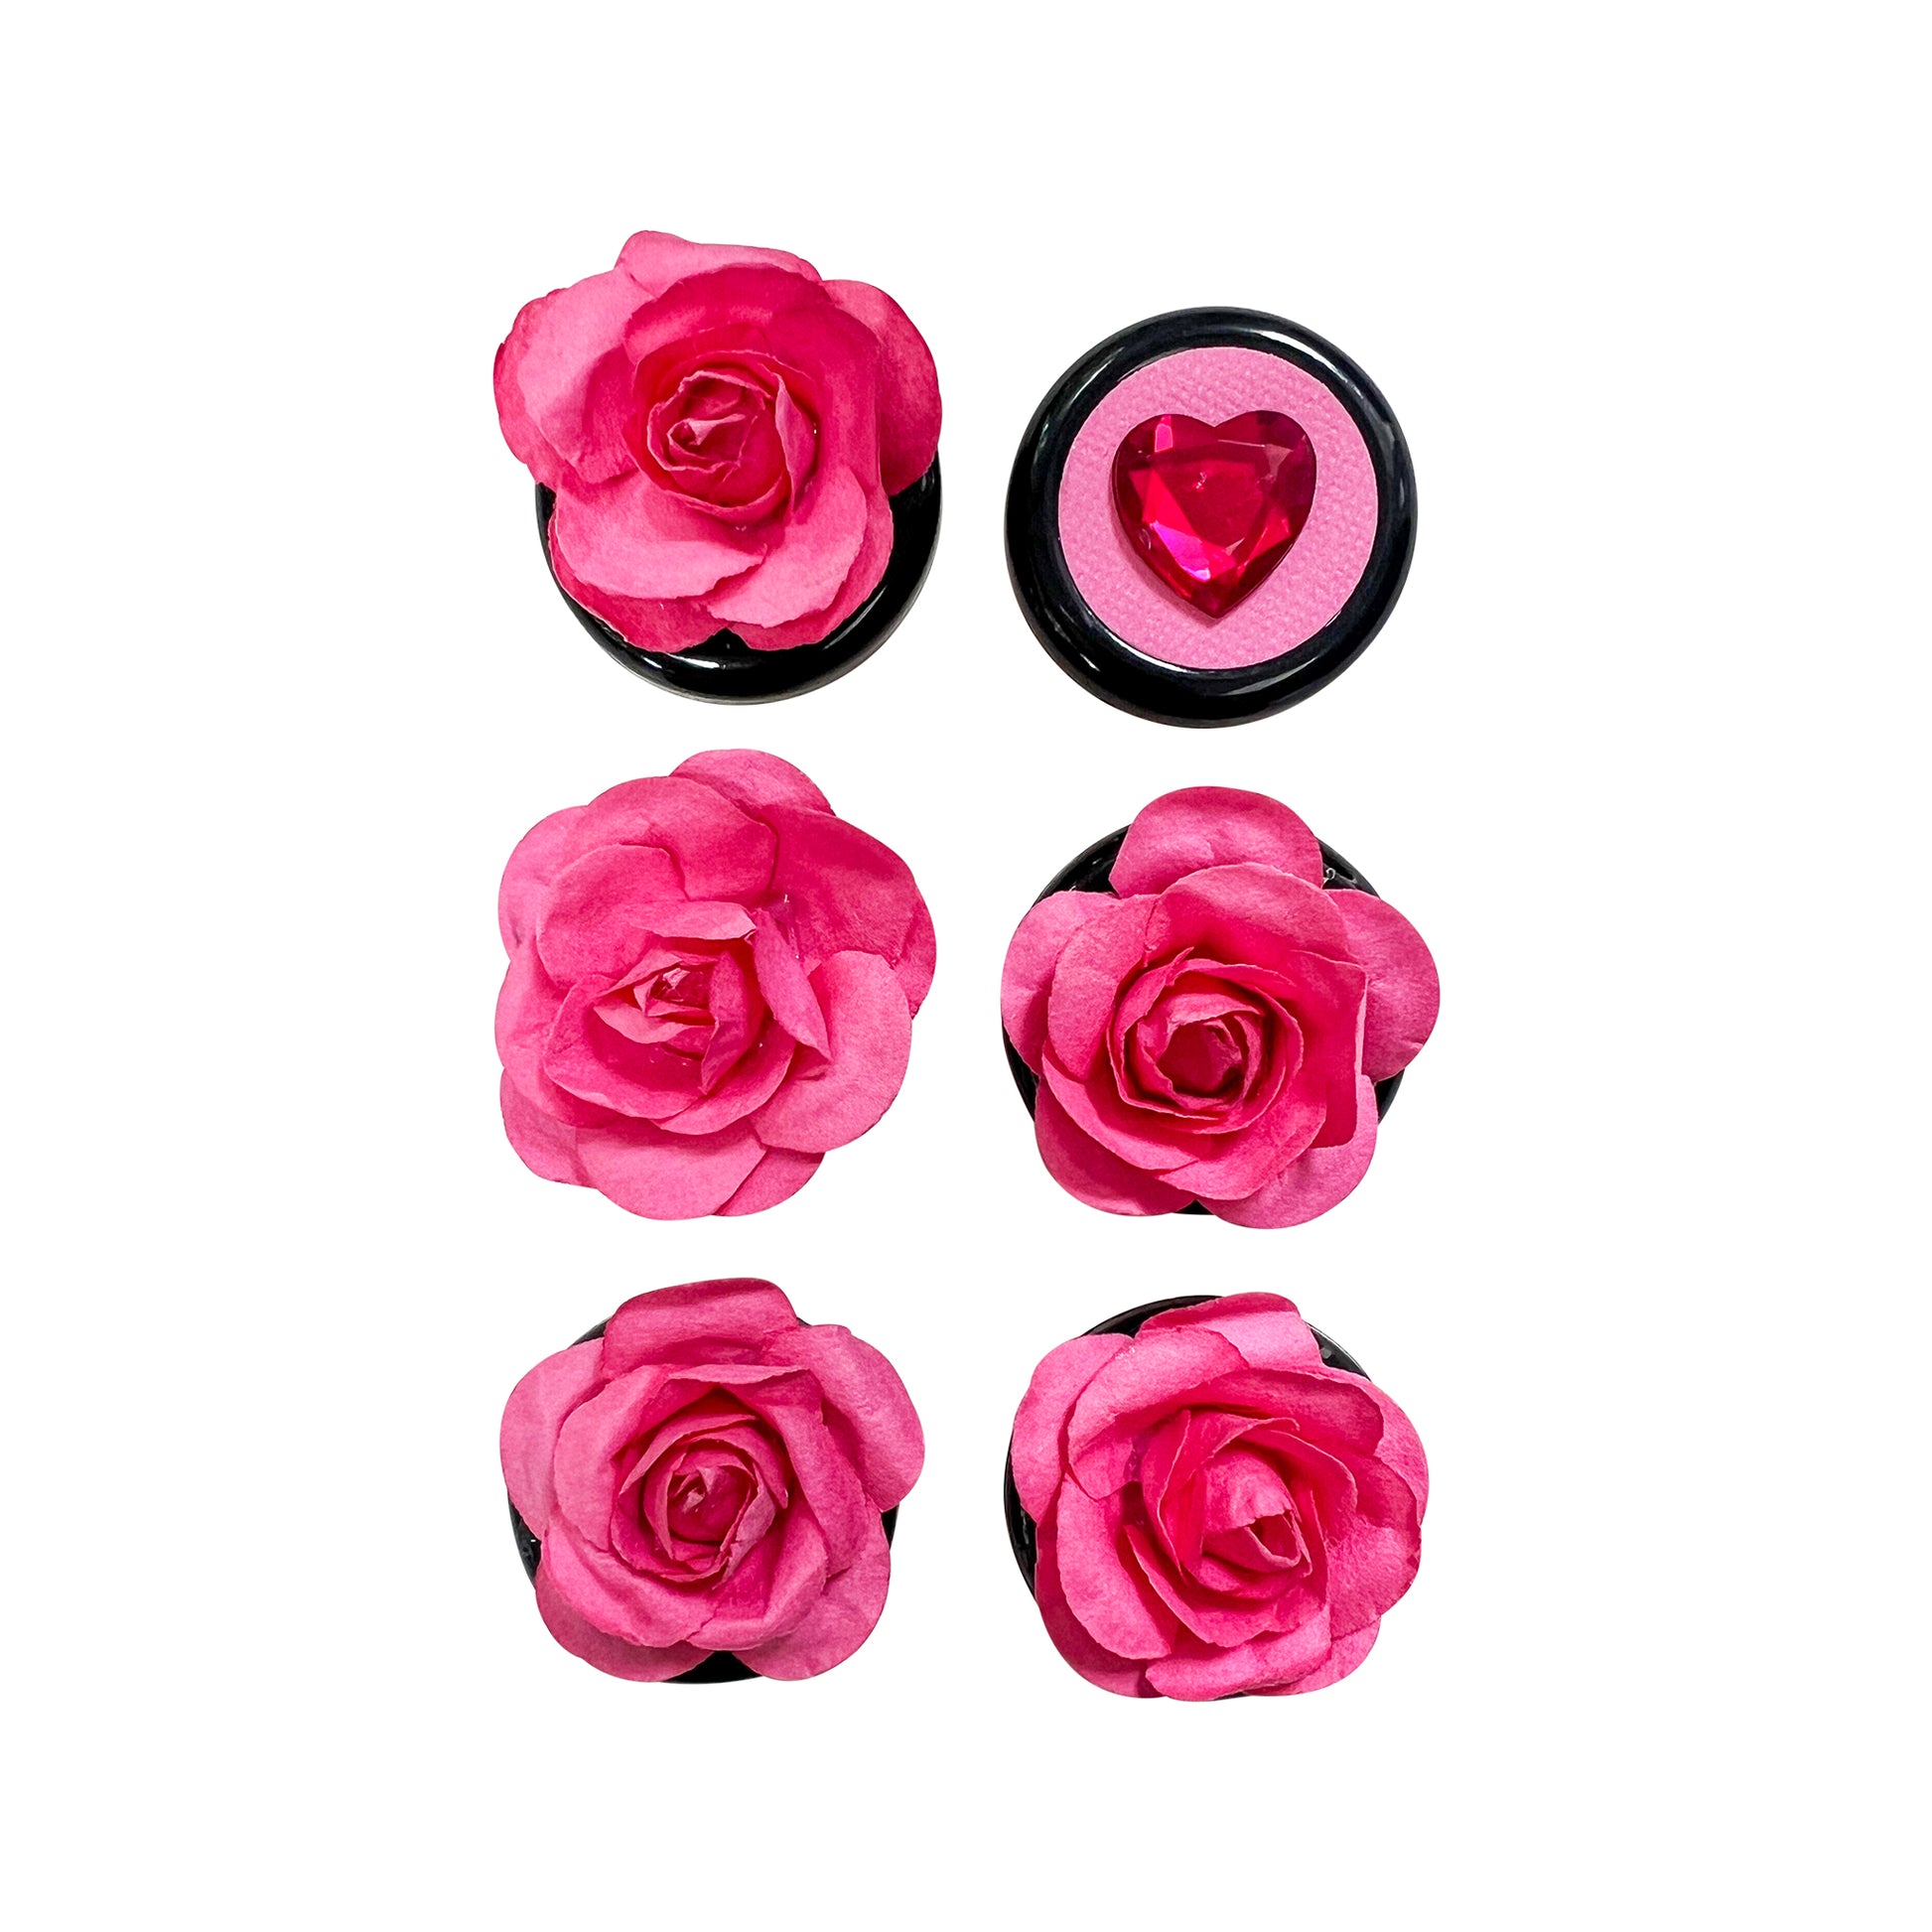 Glass Wrappings' set of 6 black button embellishments, 5 topped with pink paper roses, and 1 with a dark pink gem heart.